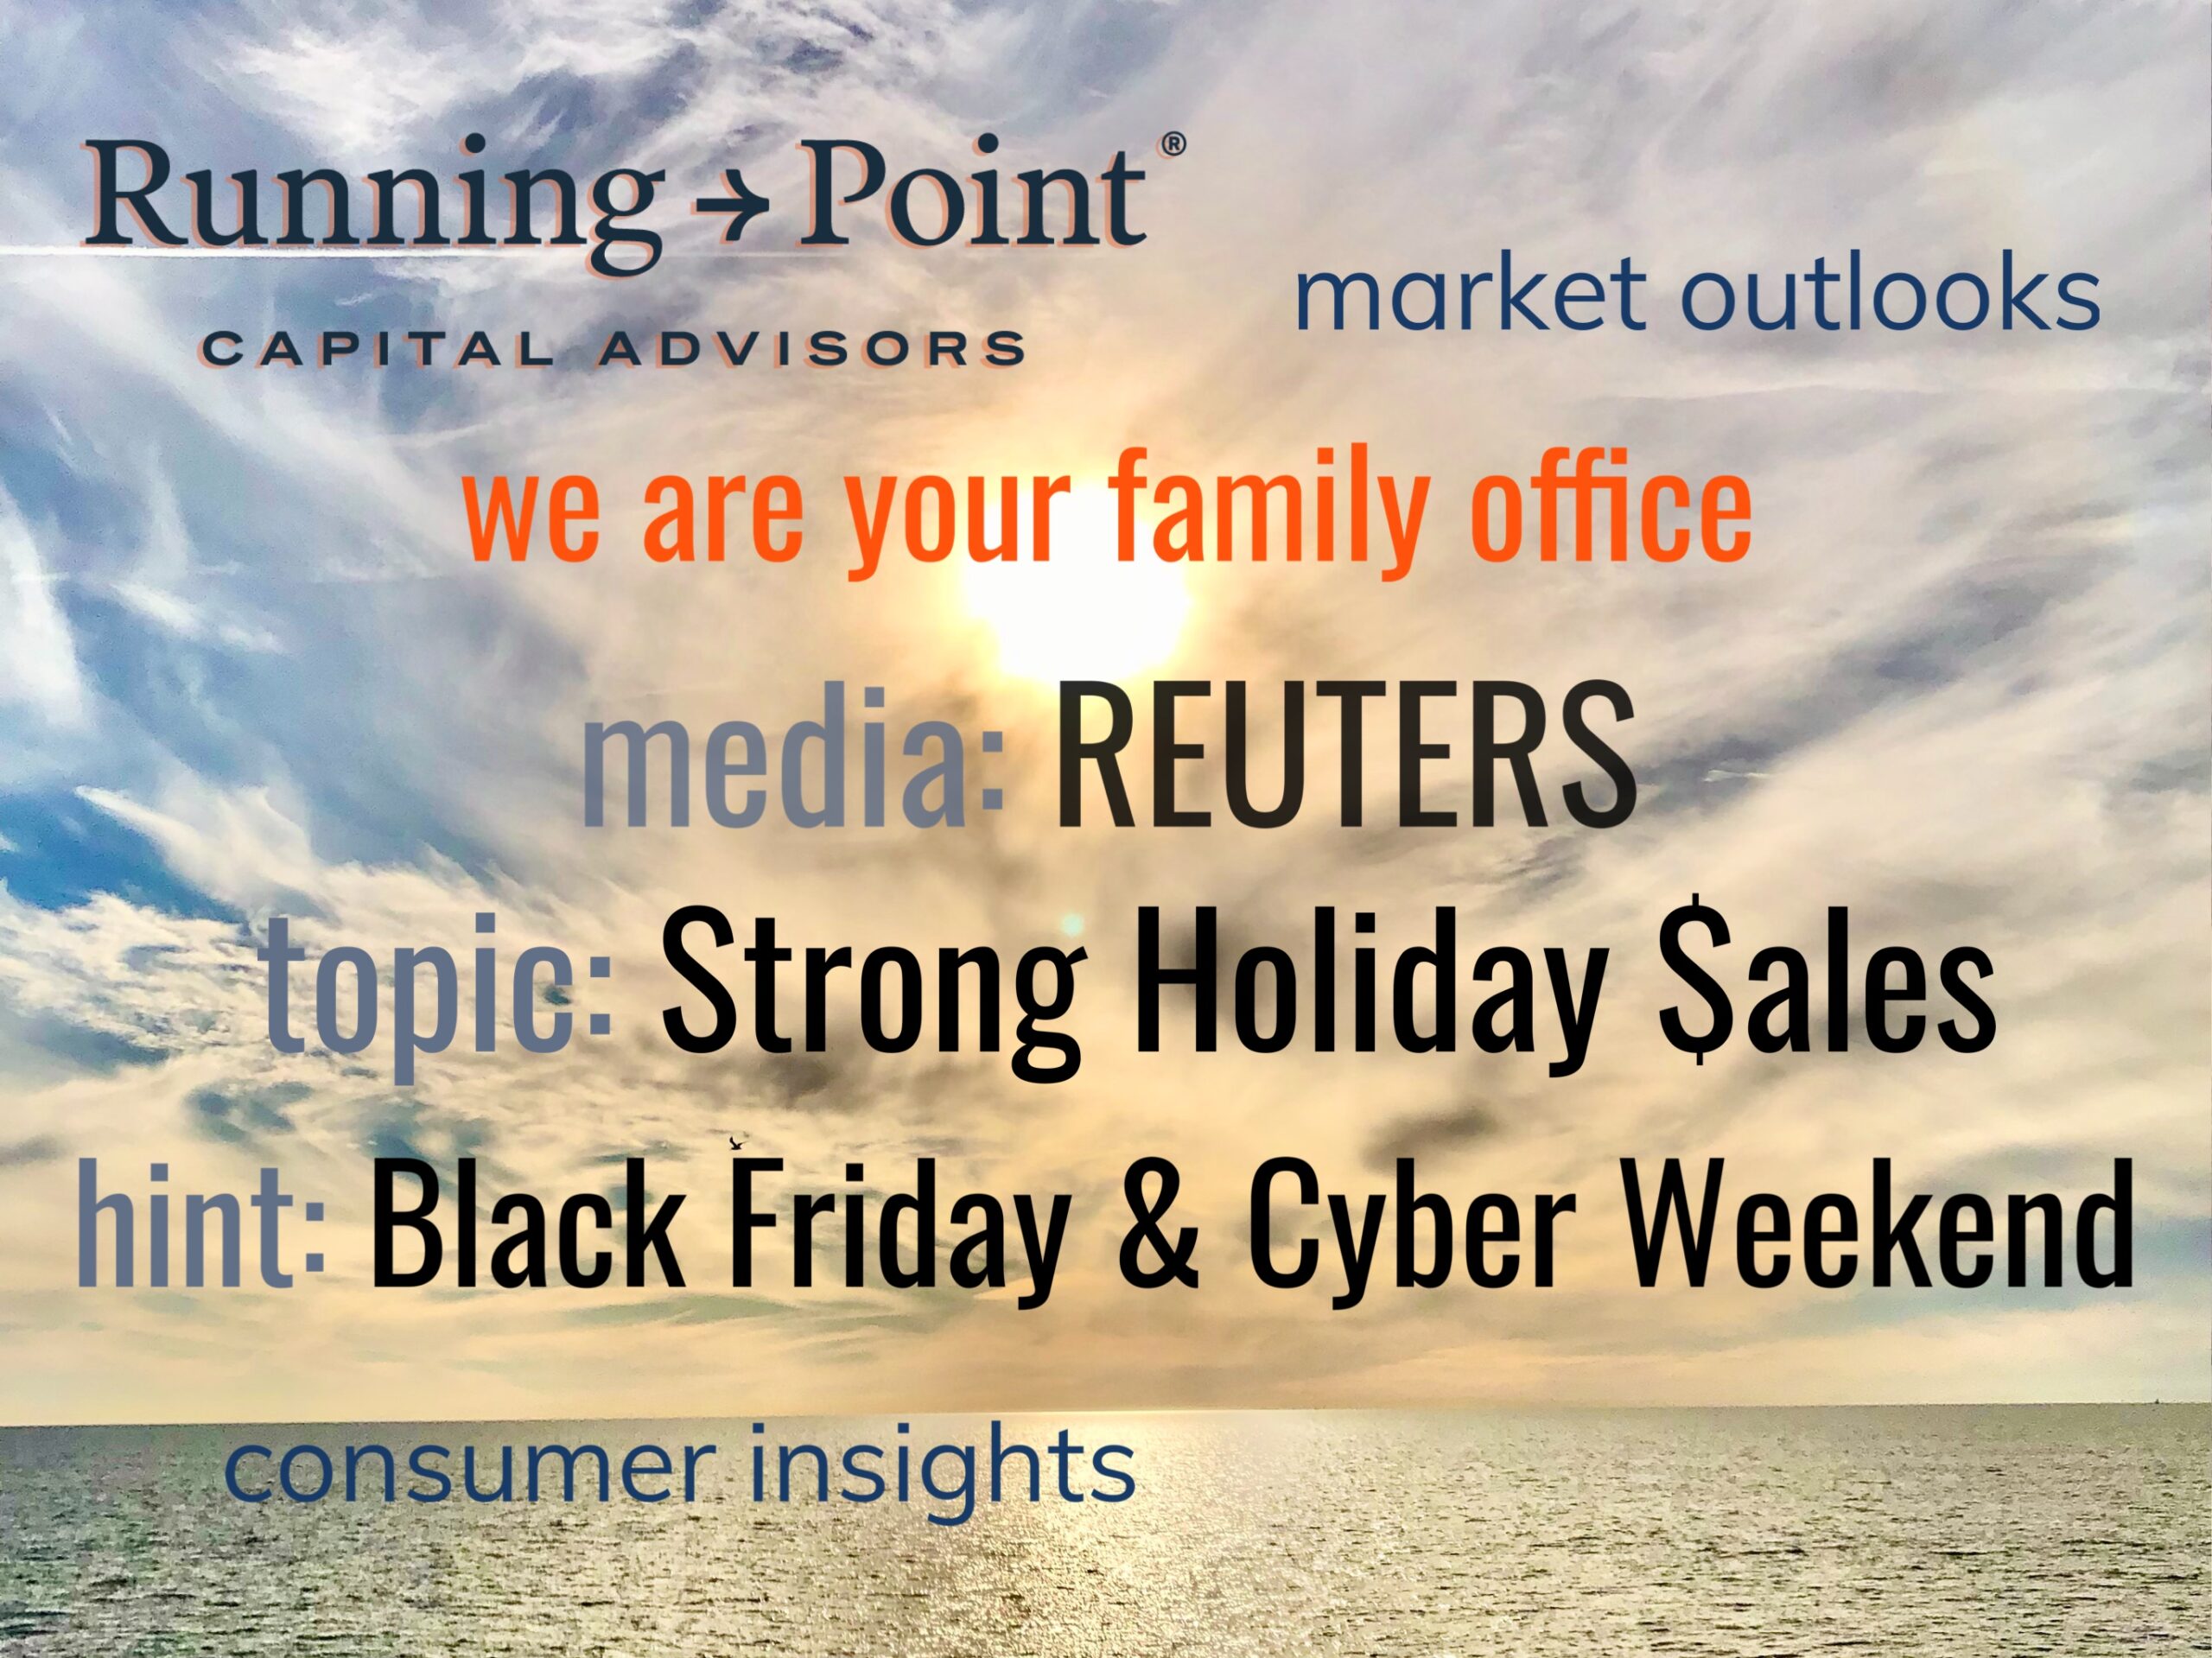 Reuters: Thanksgiving Holiday Sales Are Strong